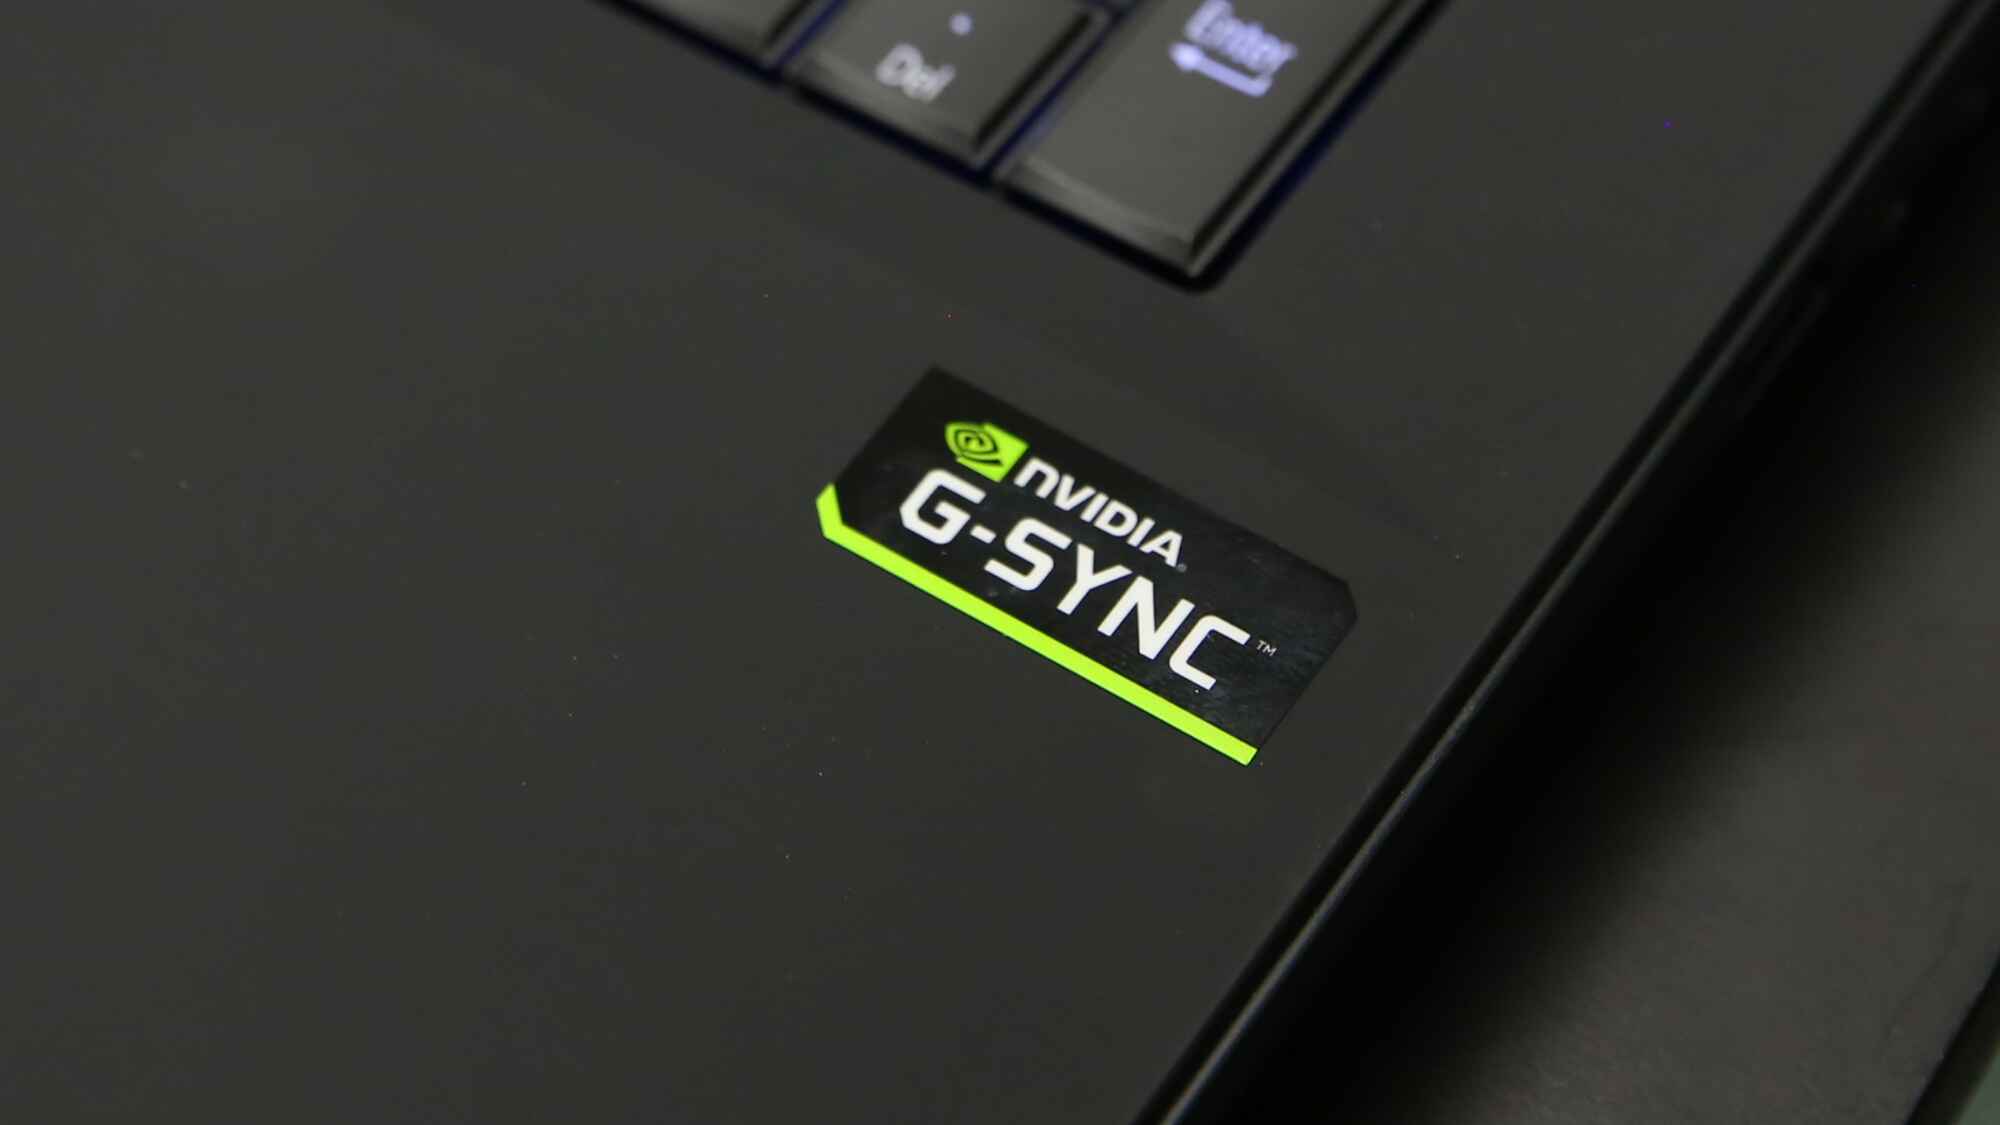 How To Know If A Gaming Laptop Has G-Sync